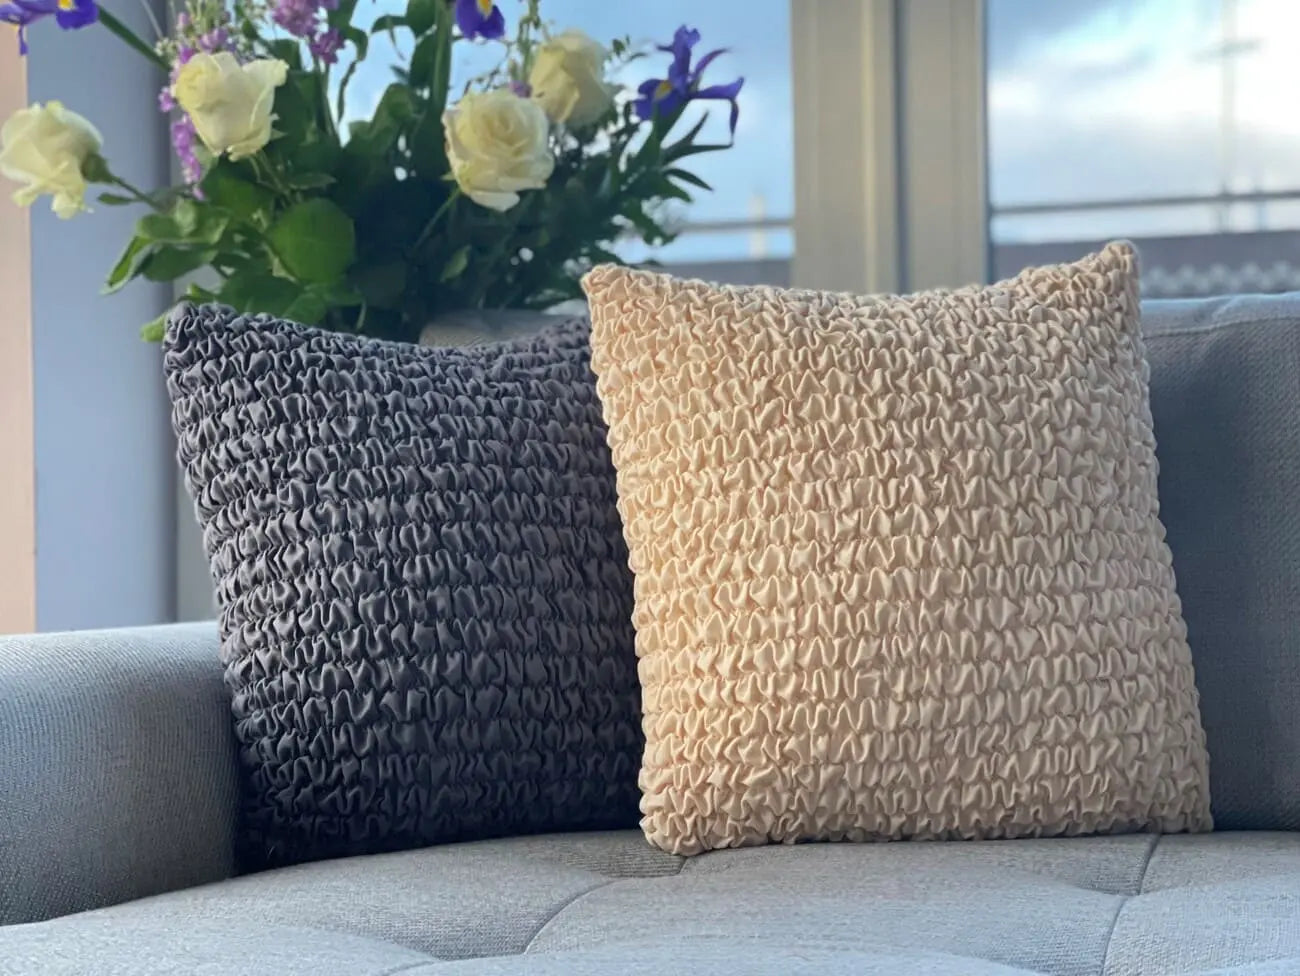 How To Make Slipcovers For Throw Pillows